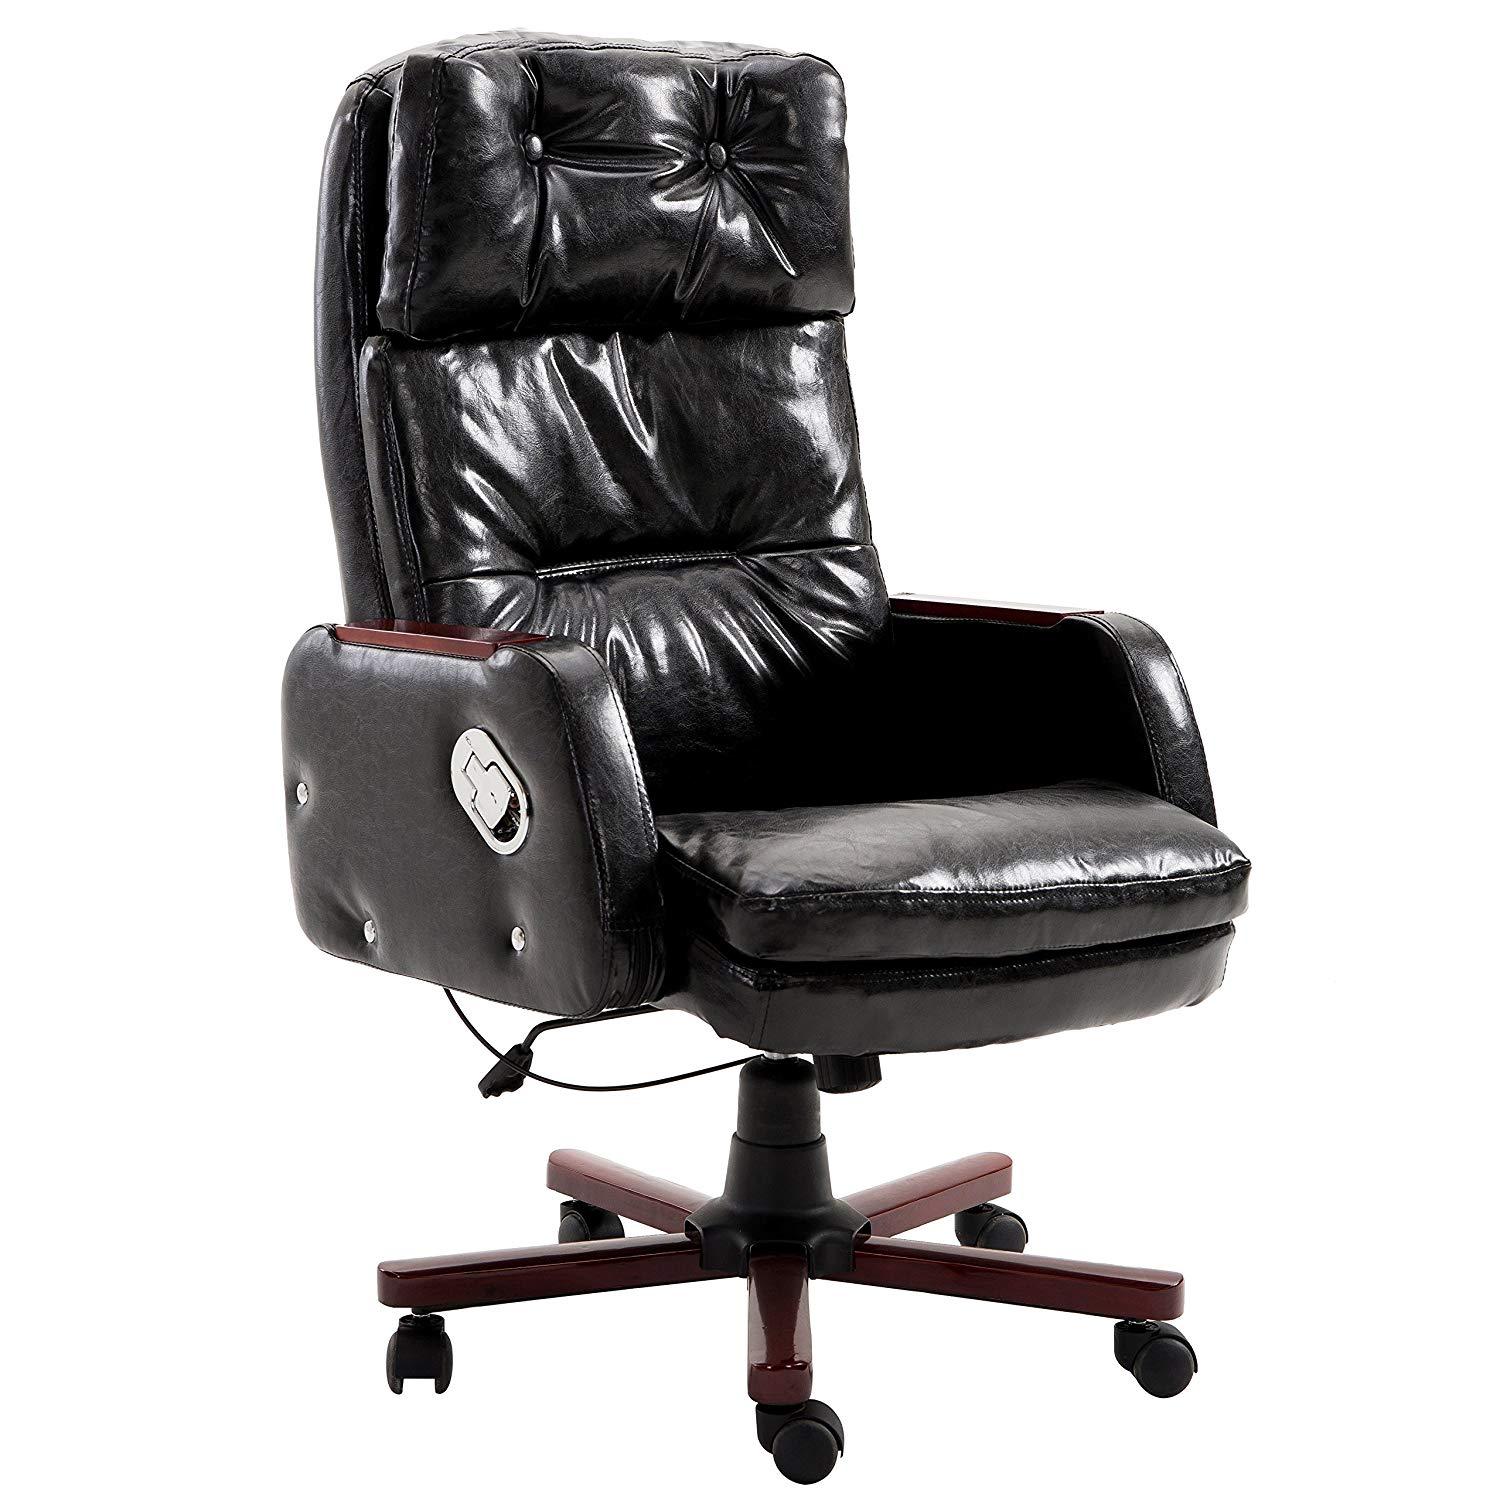 Luxury PU Leather Executive Swivel Computer Chair Office Desk Chair with Latch Recline Mechanism, Black